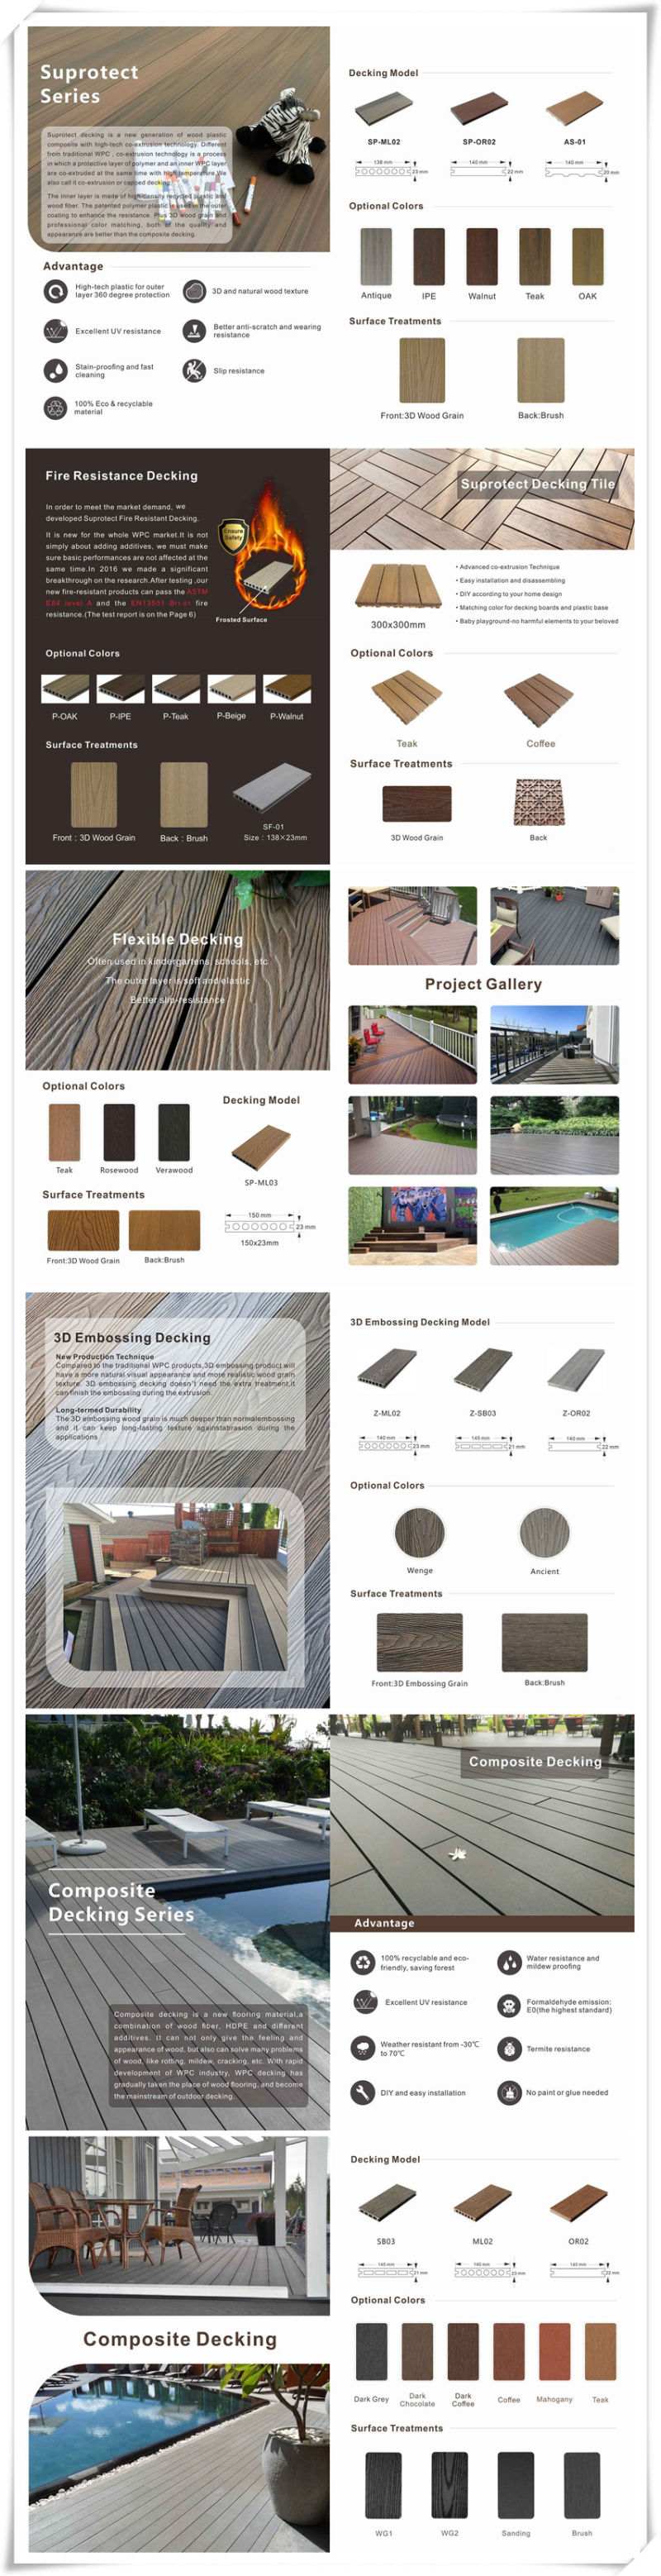 Embossed Wood Composite Decking Outdoor WPC Floor Decking Outdoor Garden Floor